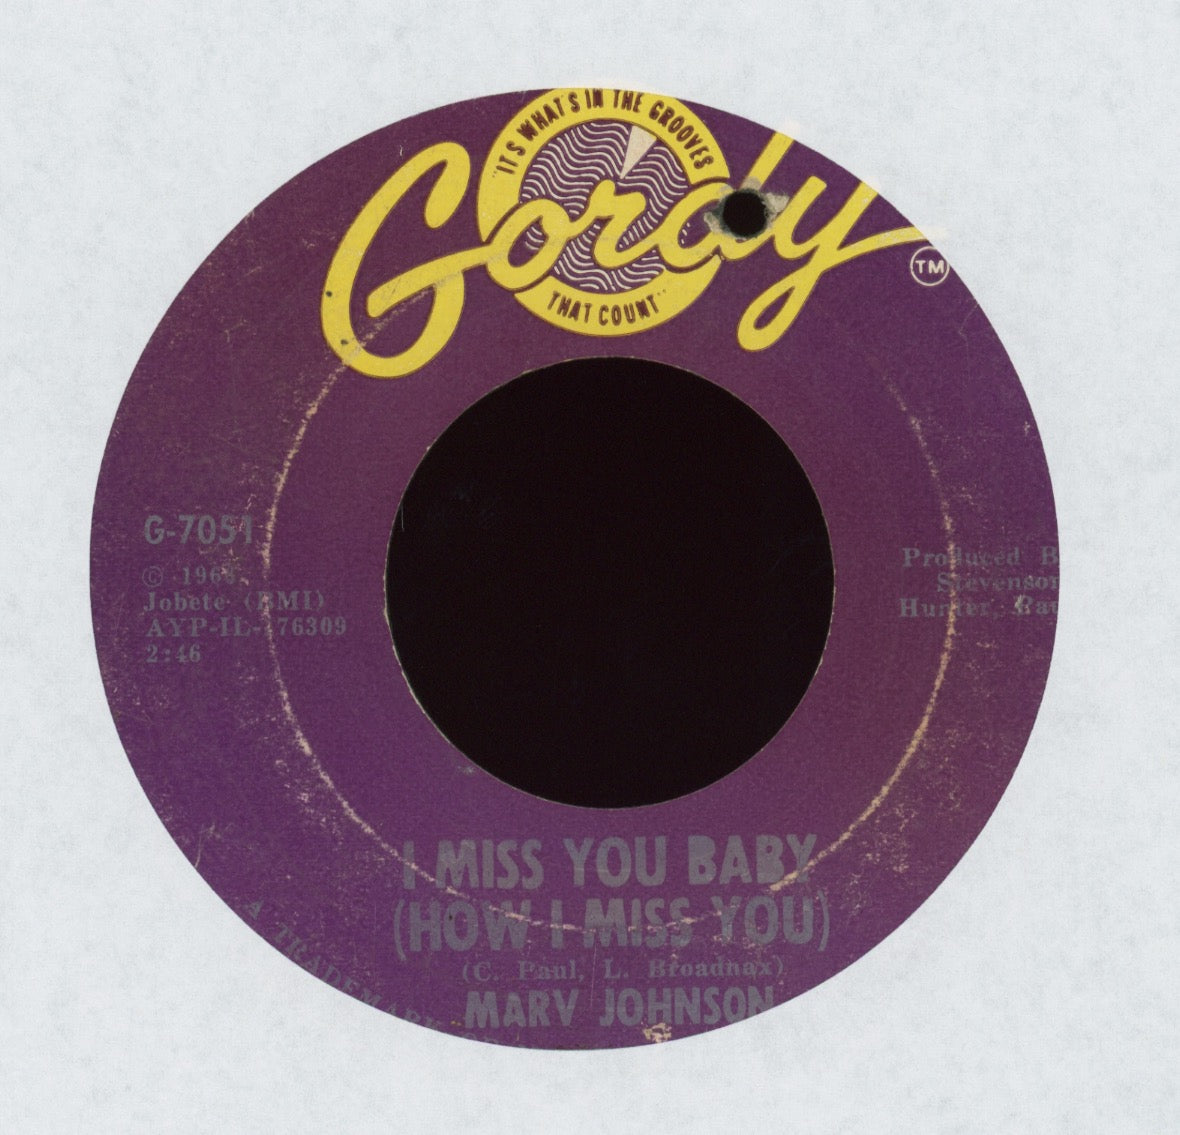 Marv Johnson - I Miss You Baby (How I Miss You) on Gordy